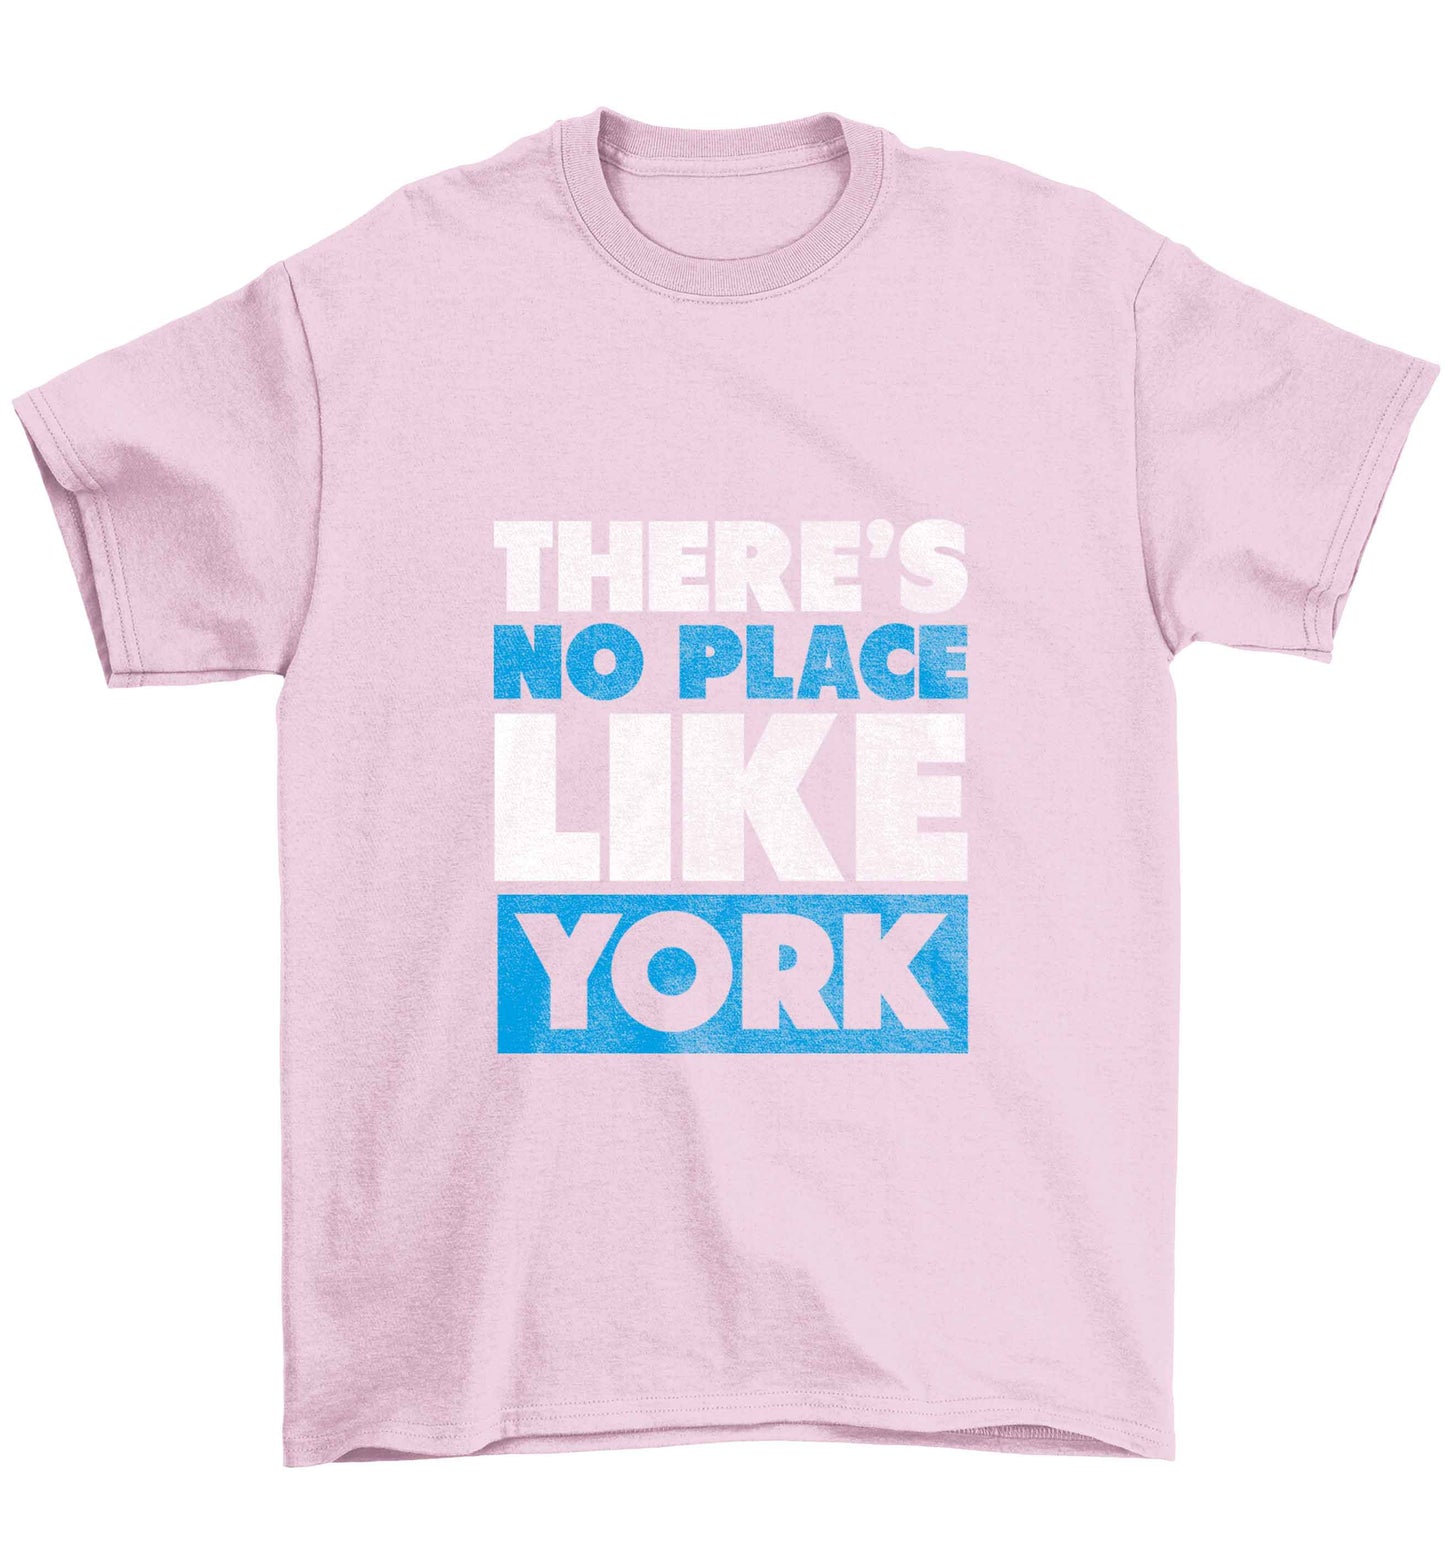 There's no place like york Children's light pink Tshirt 12-13 Years